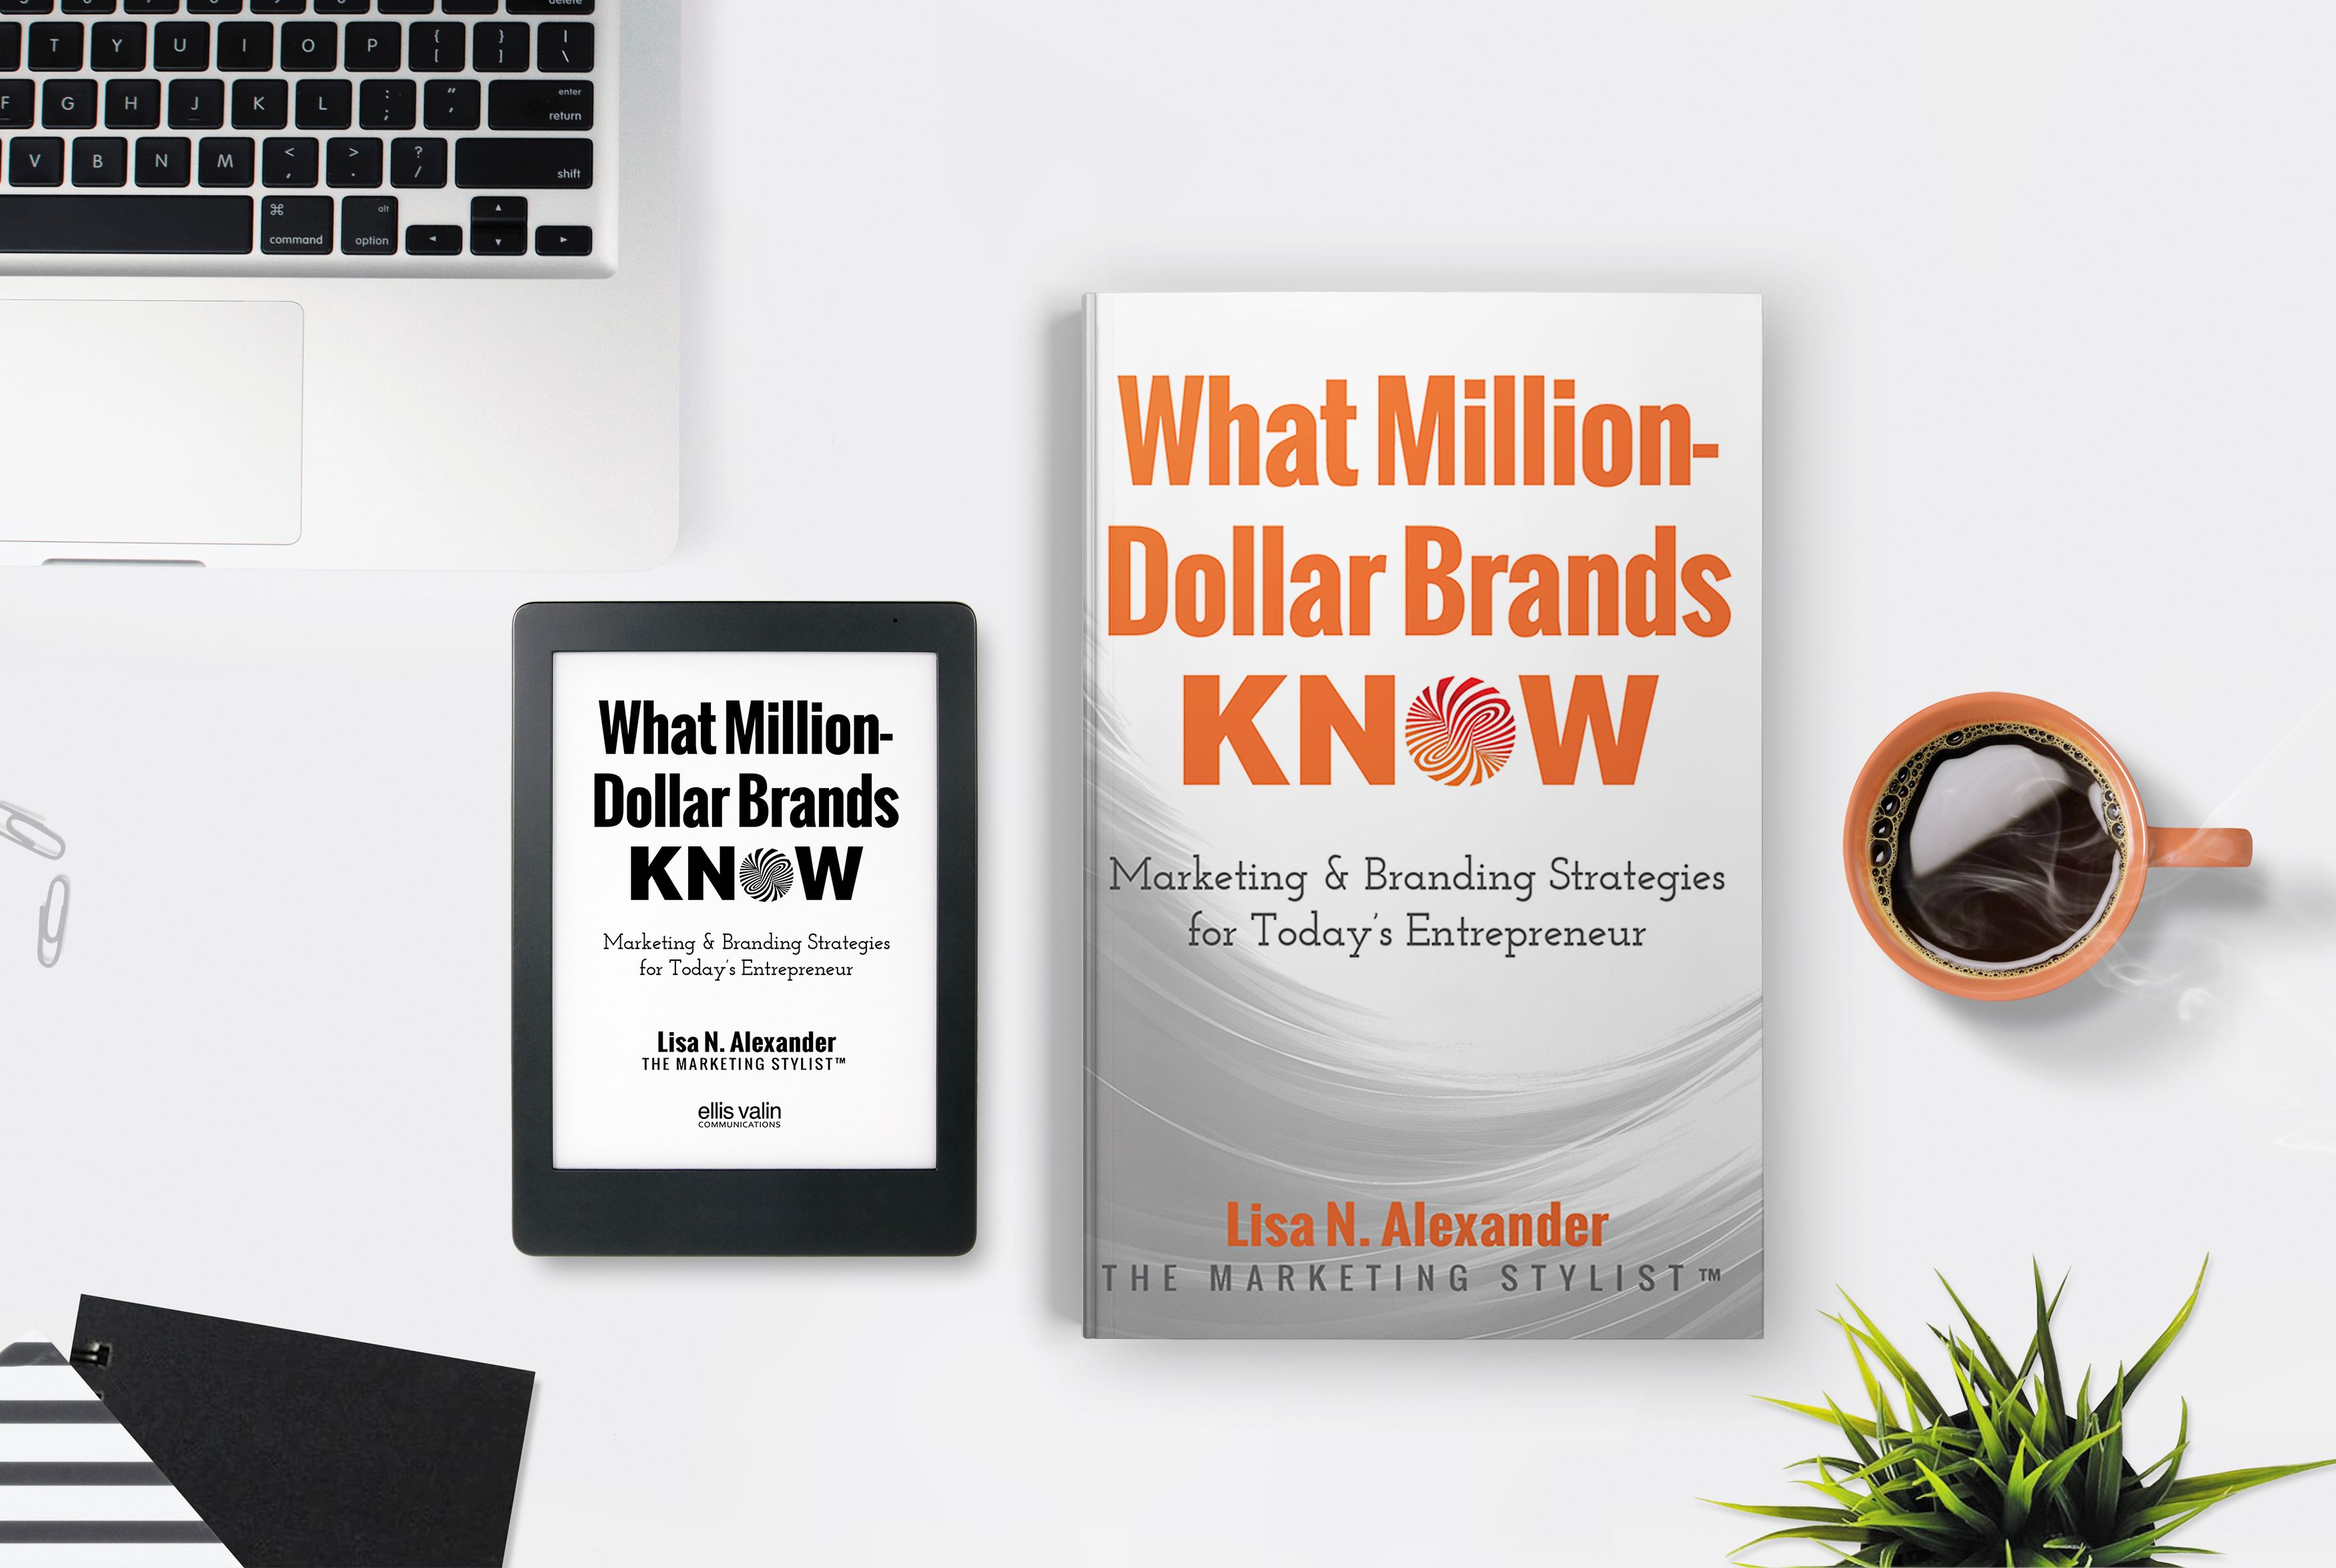 What Million-Dollar Brands Know: Marketing & Branding Strategies for Today’s Entrepreneur by Lisa N. Alexander to be Published, September 22, 2019